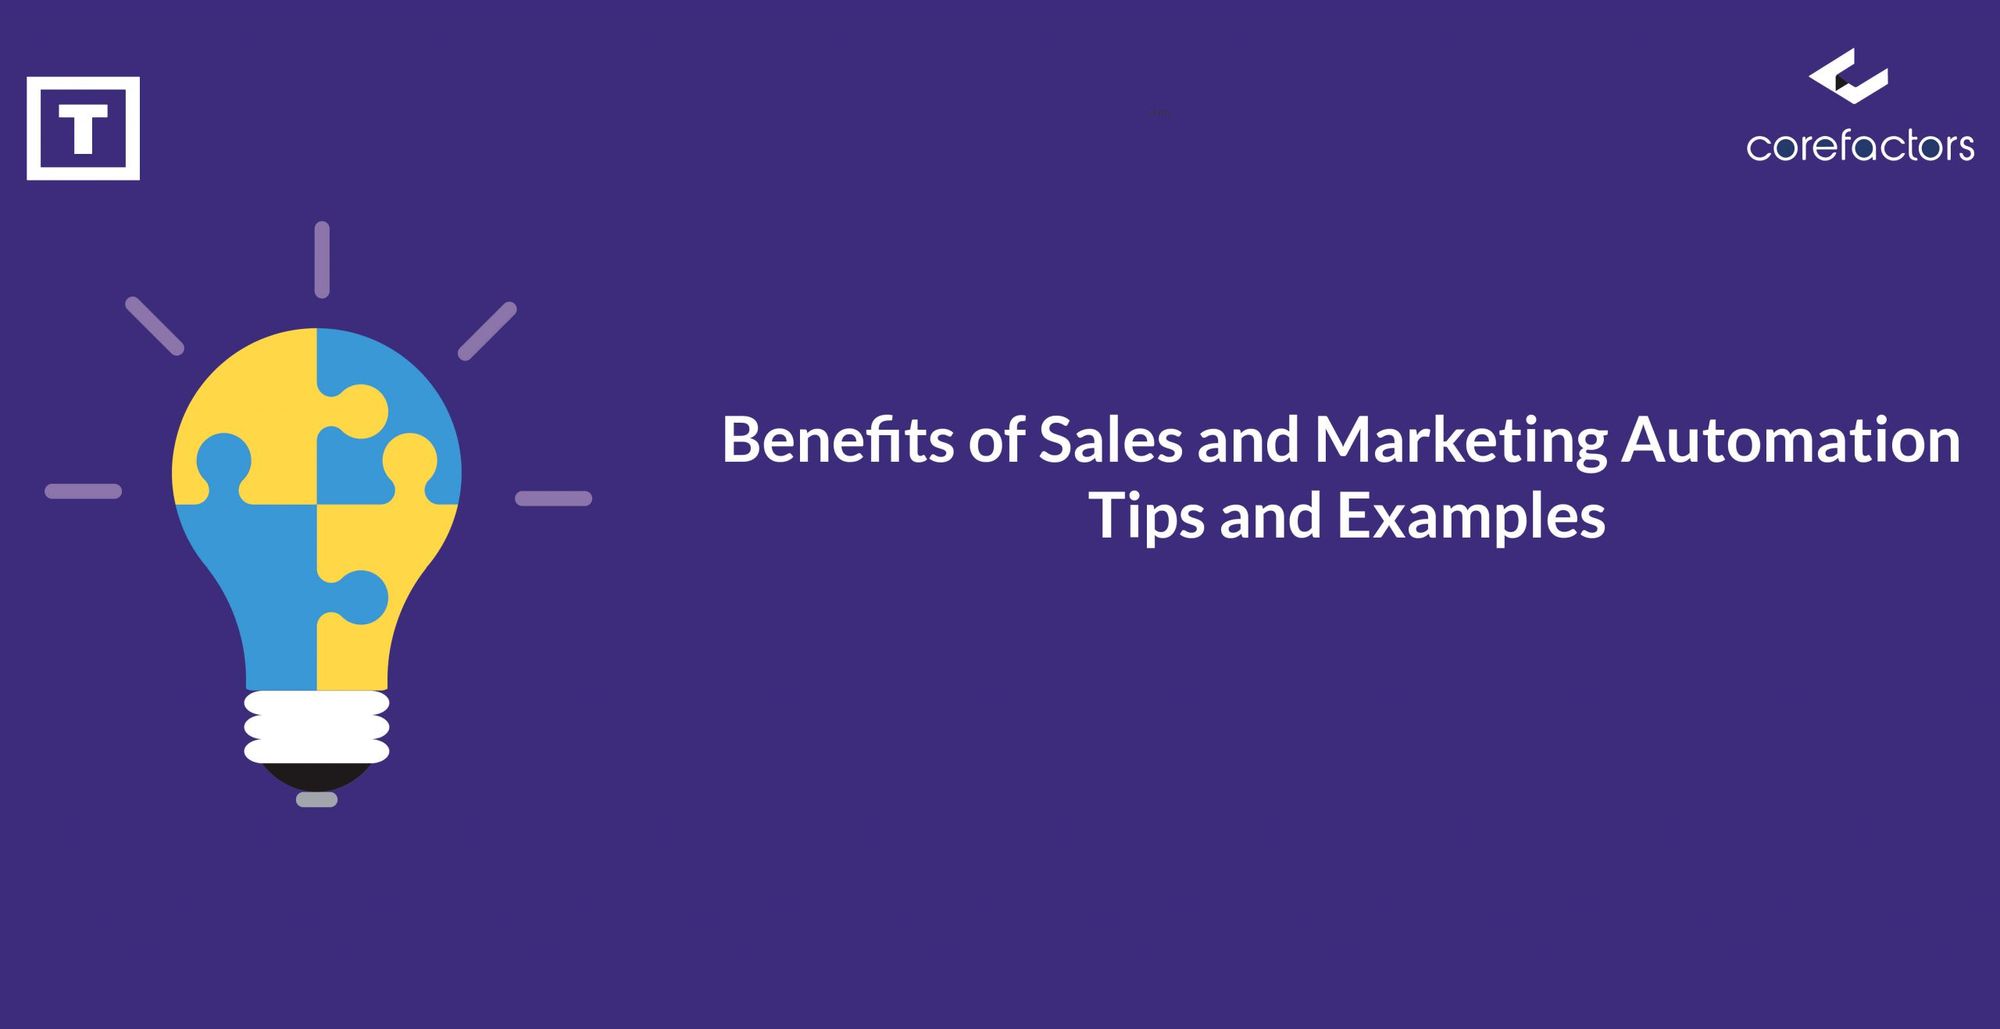 Benefits of Sales and Marketing Automation: Tips and Examples